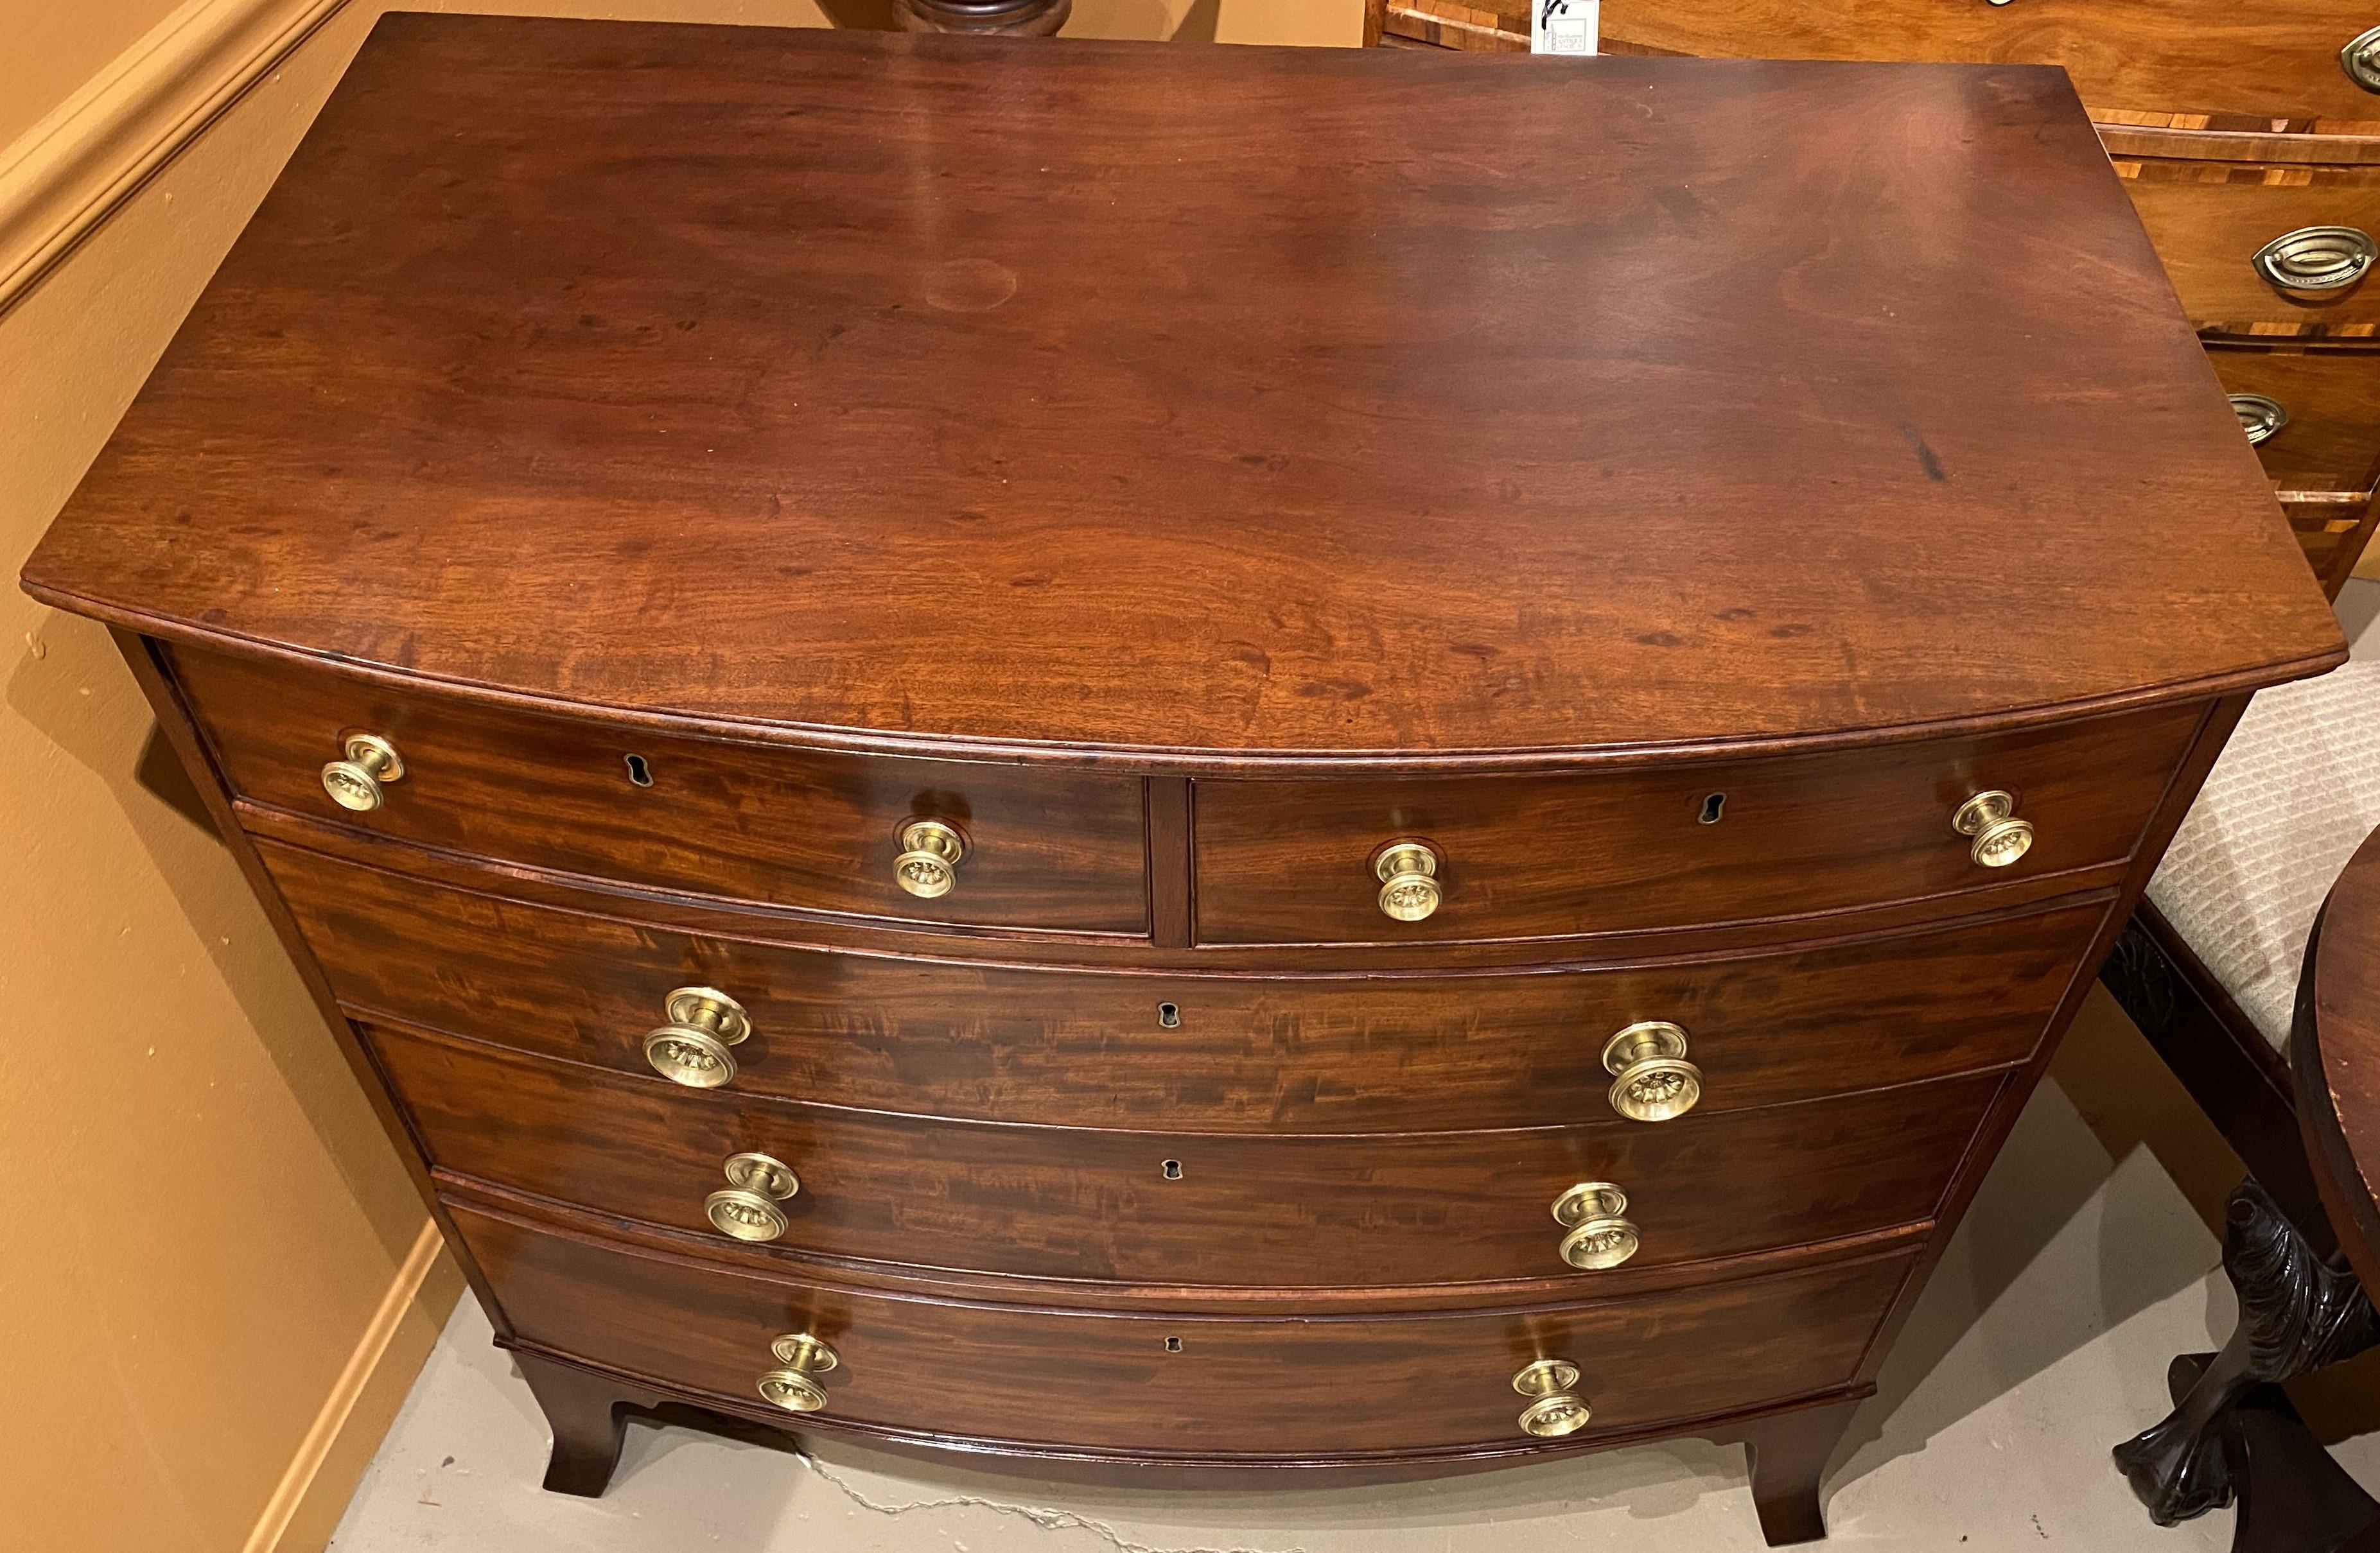 A fine example of a Federal American bow front chest in mahogany with conforming molded edge top, surmounting a case two over three drawer configuration, each with dovetailed construction and punched brass pulls,nicely shaped skirt and supported by